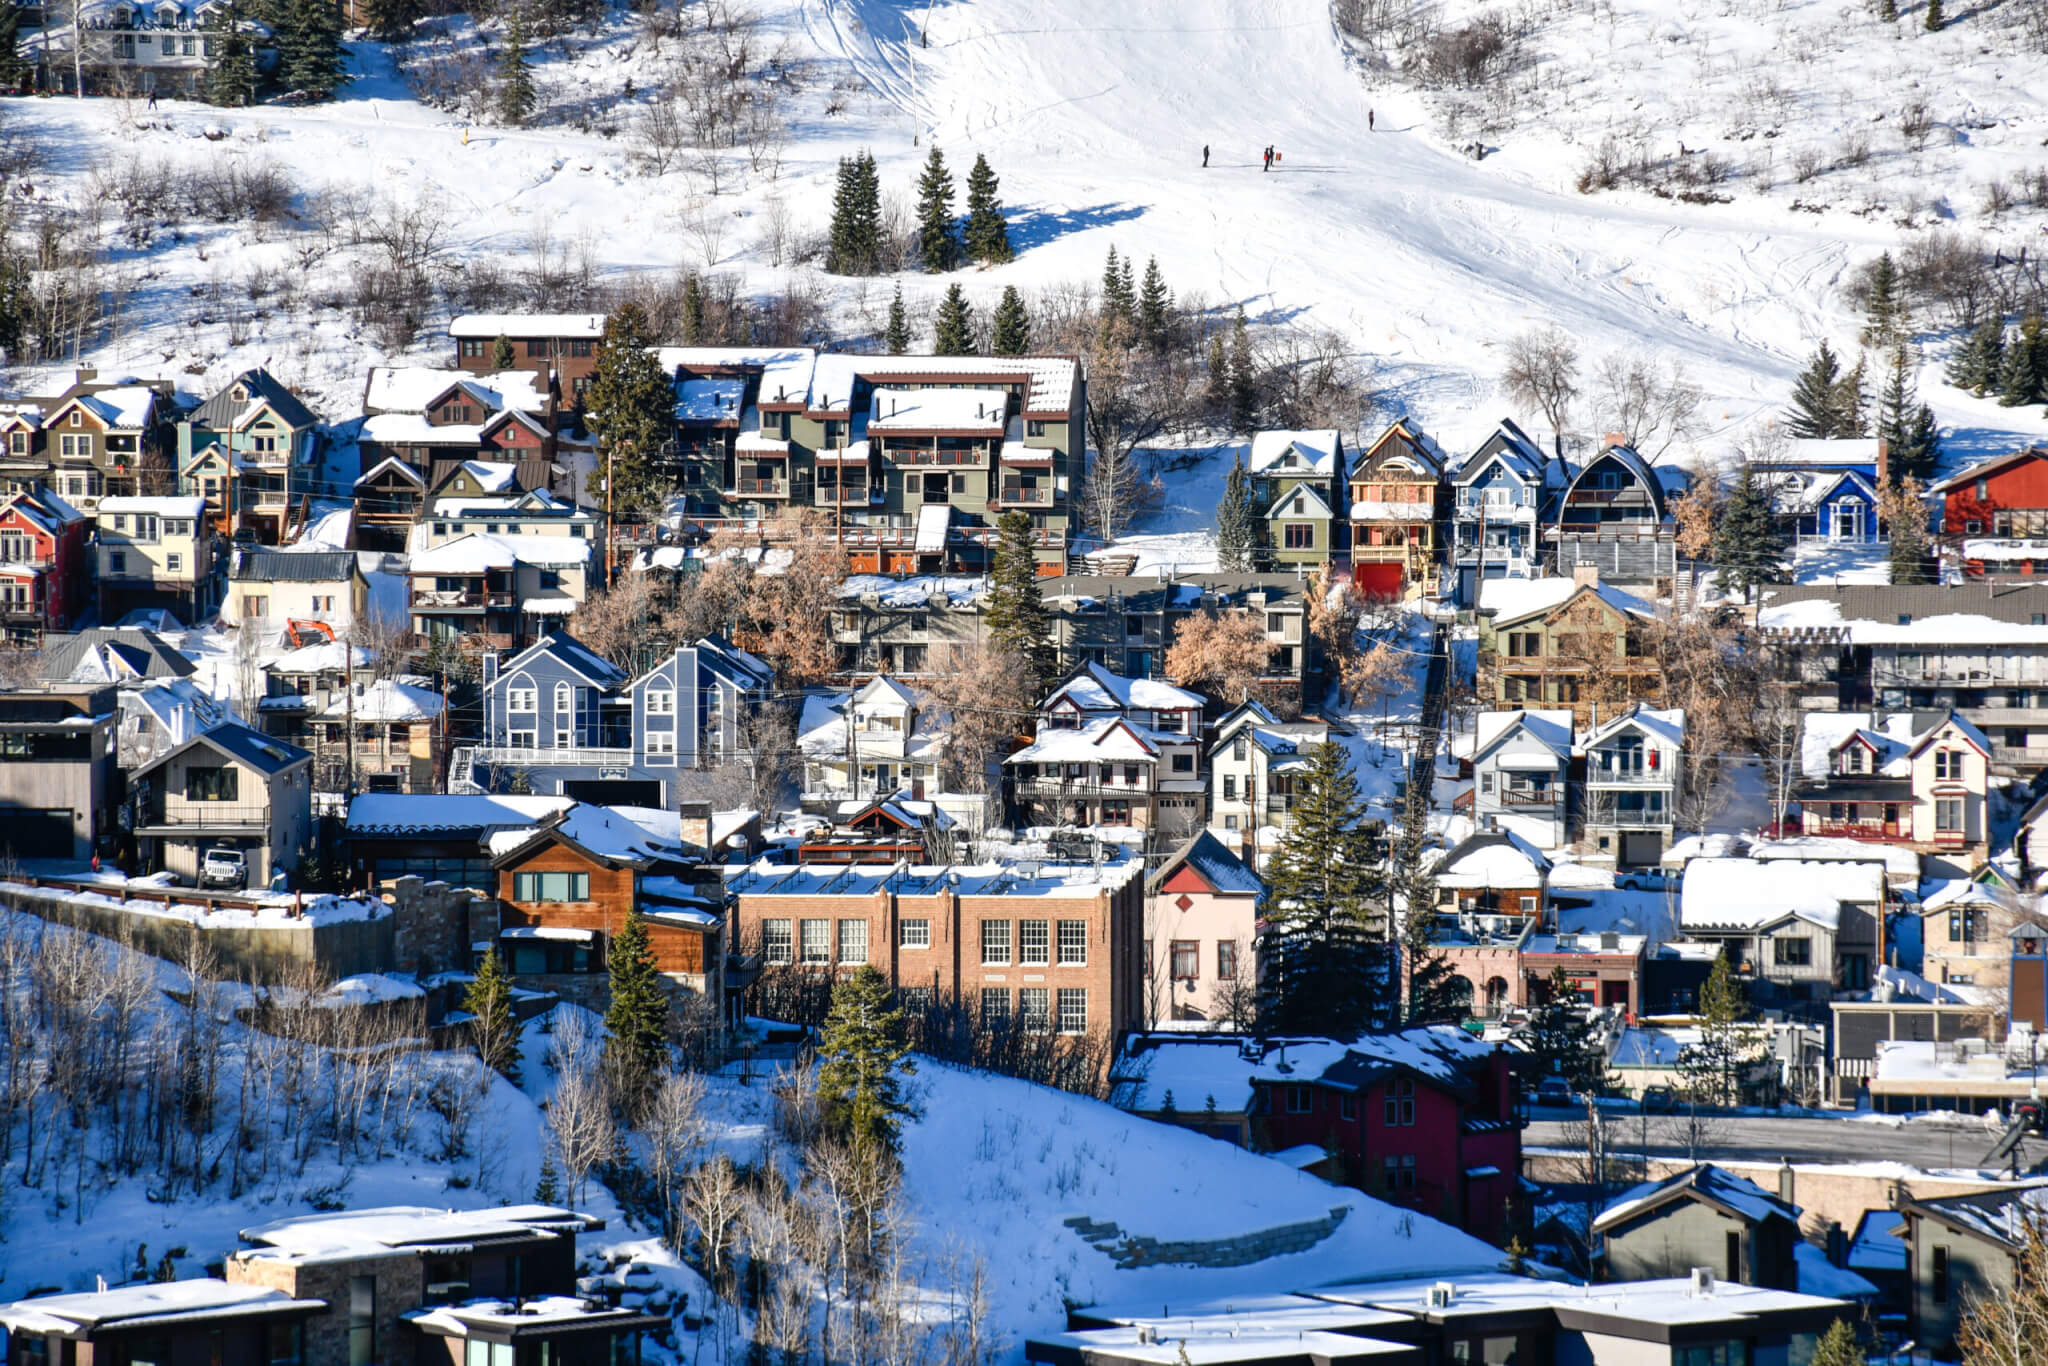 Vacation homes crowded on the hillside in the downtown Park City ski area during winter in the Wasatch Mountains near Salt Lake City, Utah